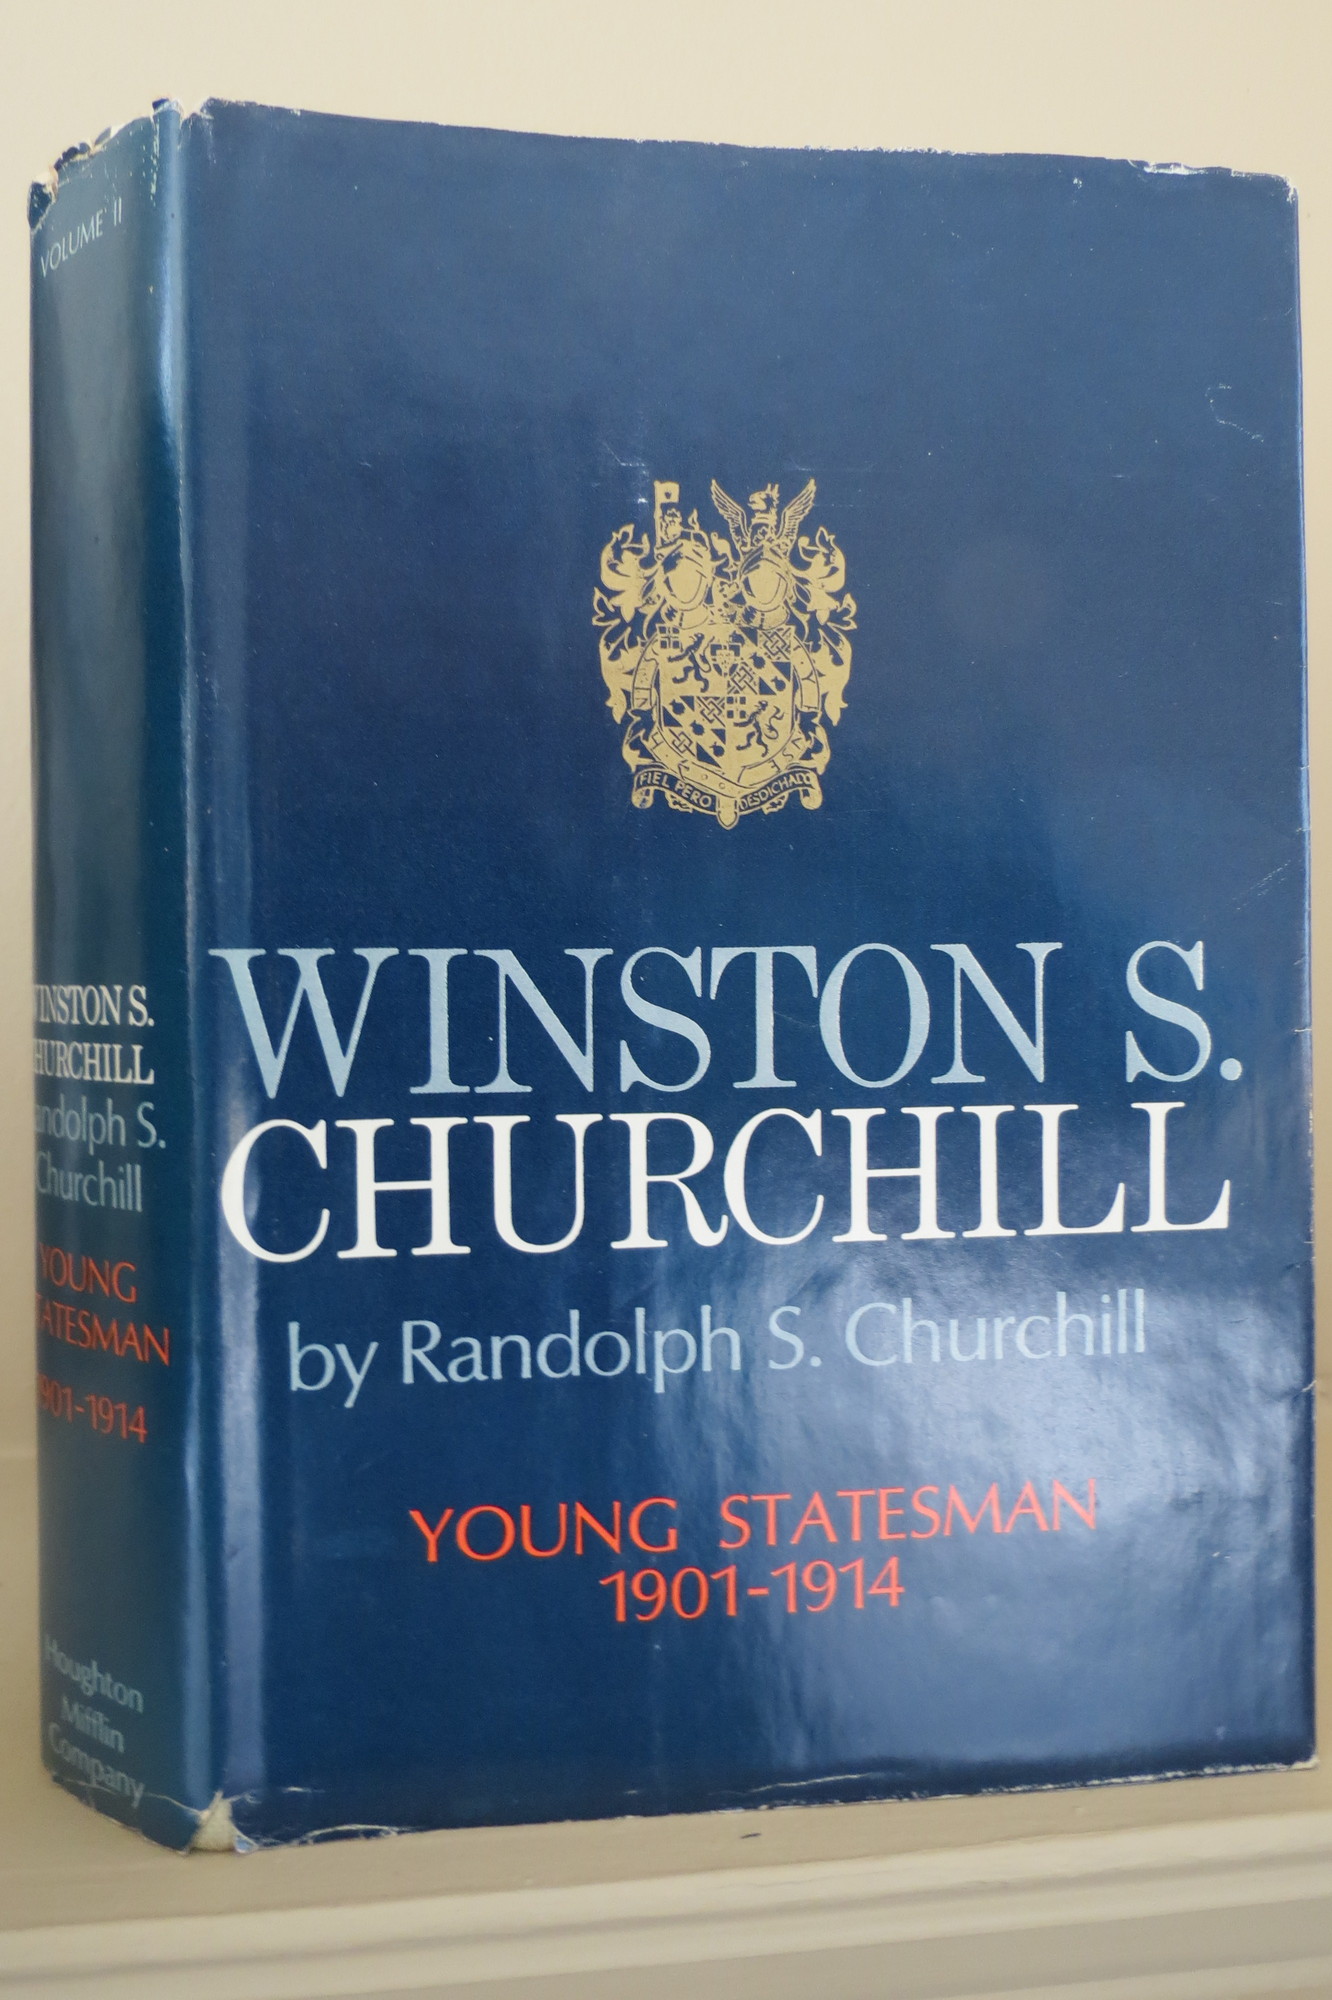 Image for WINSTON S. CHURCHILL Young Statesman, 1901-1914 (DJ protected by clear, acid-free mylar cover)